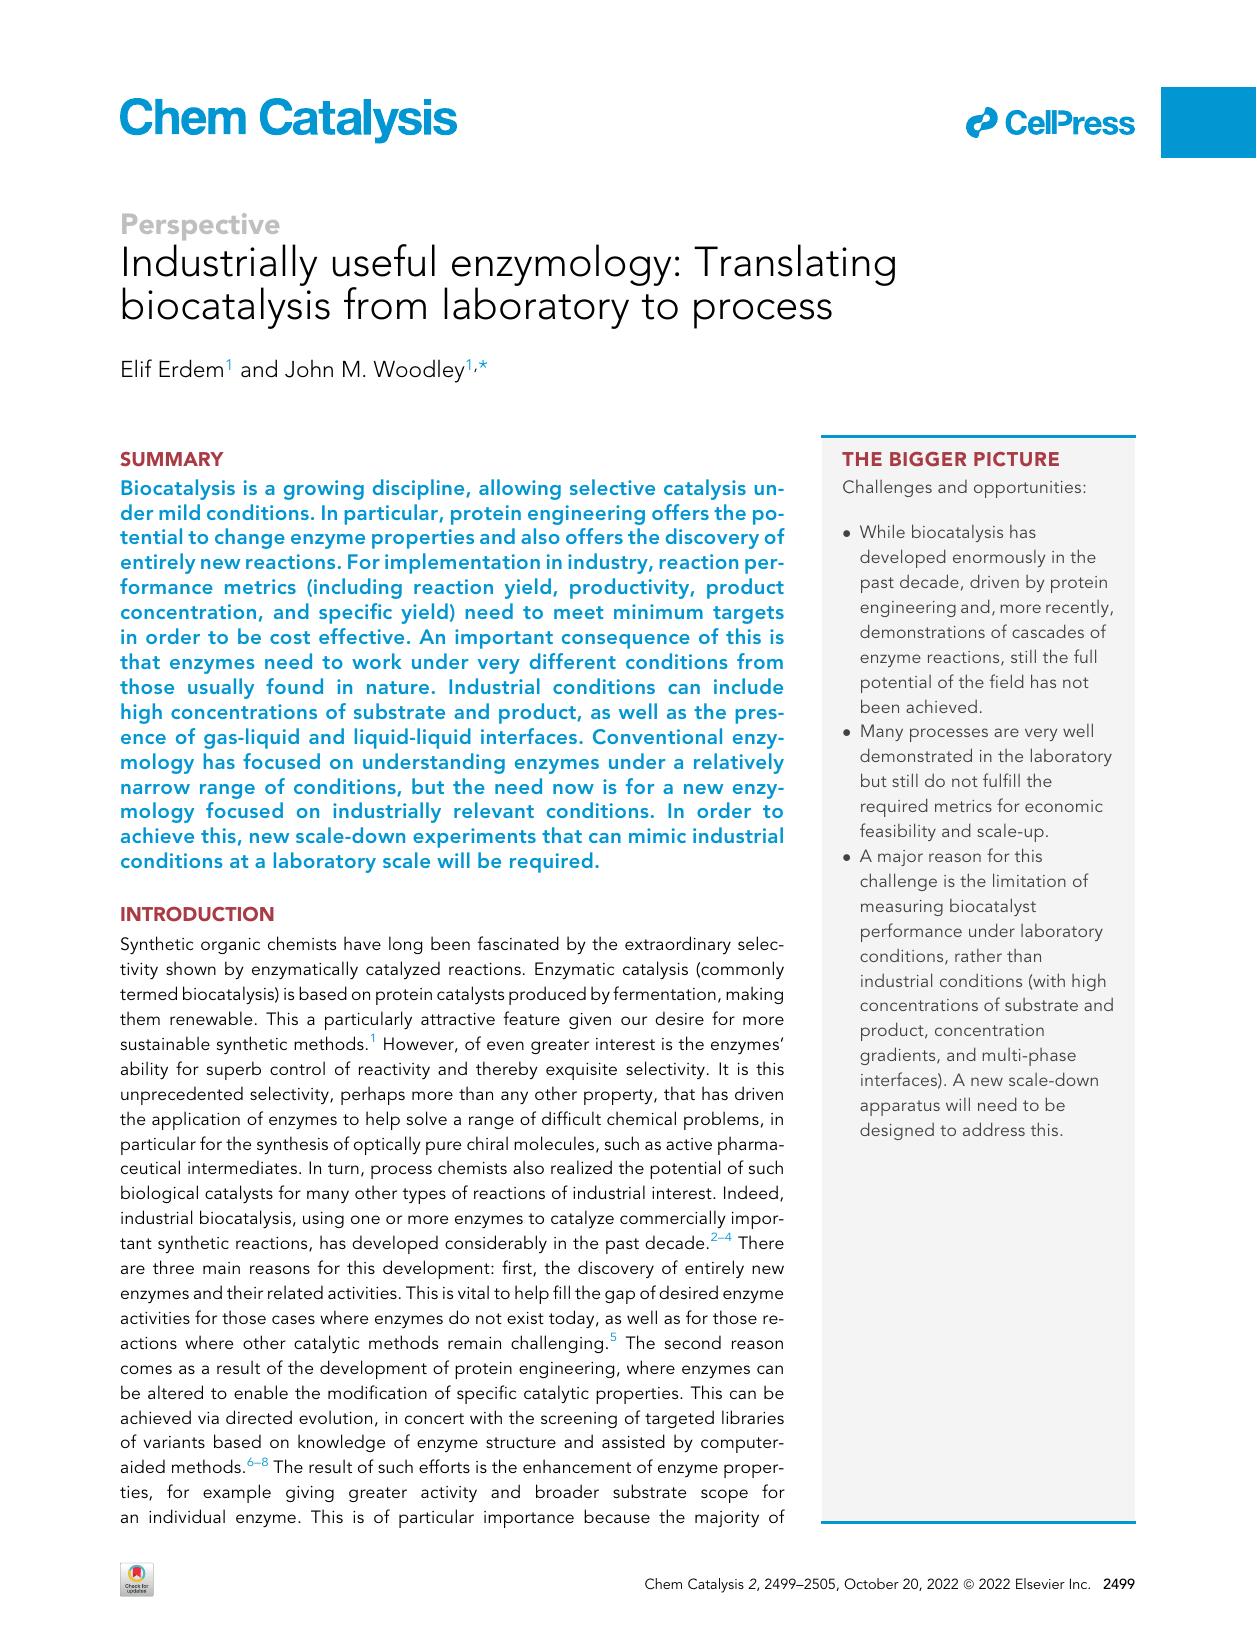 Industrially useful enzymology: Translating biocatalysis from laboratory to process by Elif Erdem